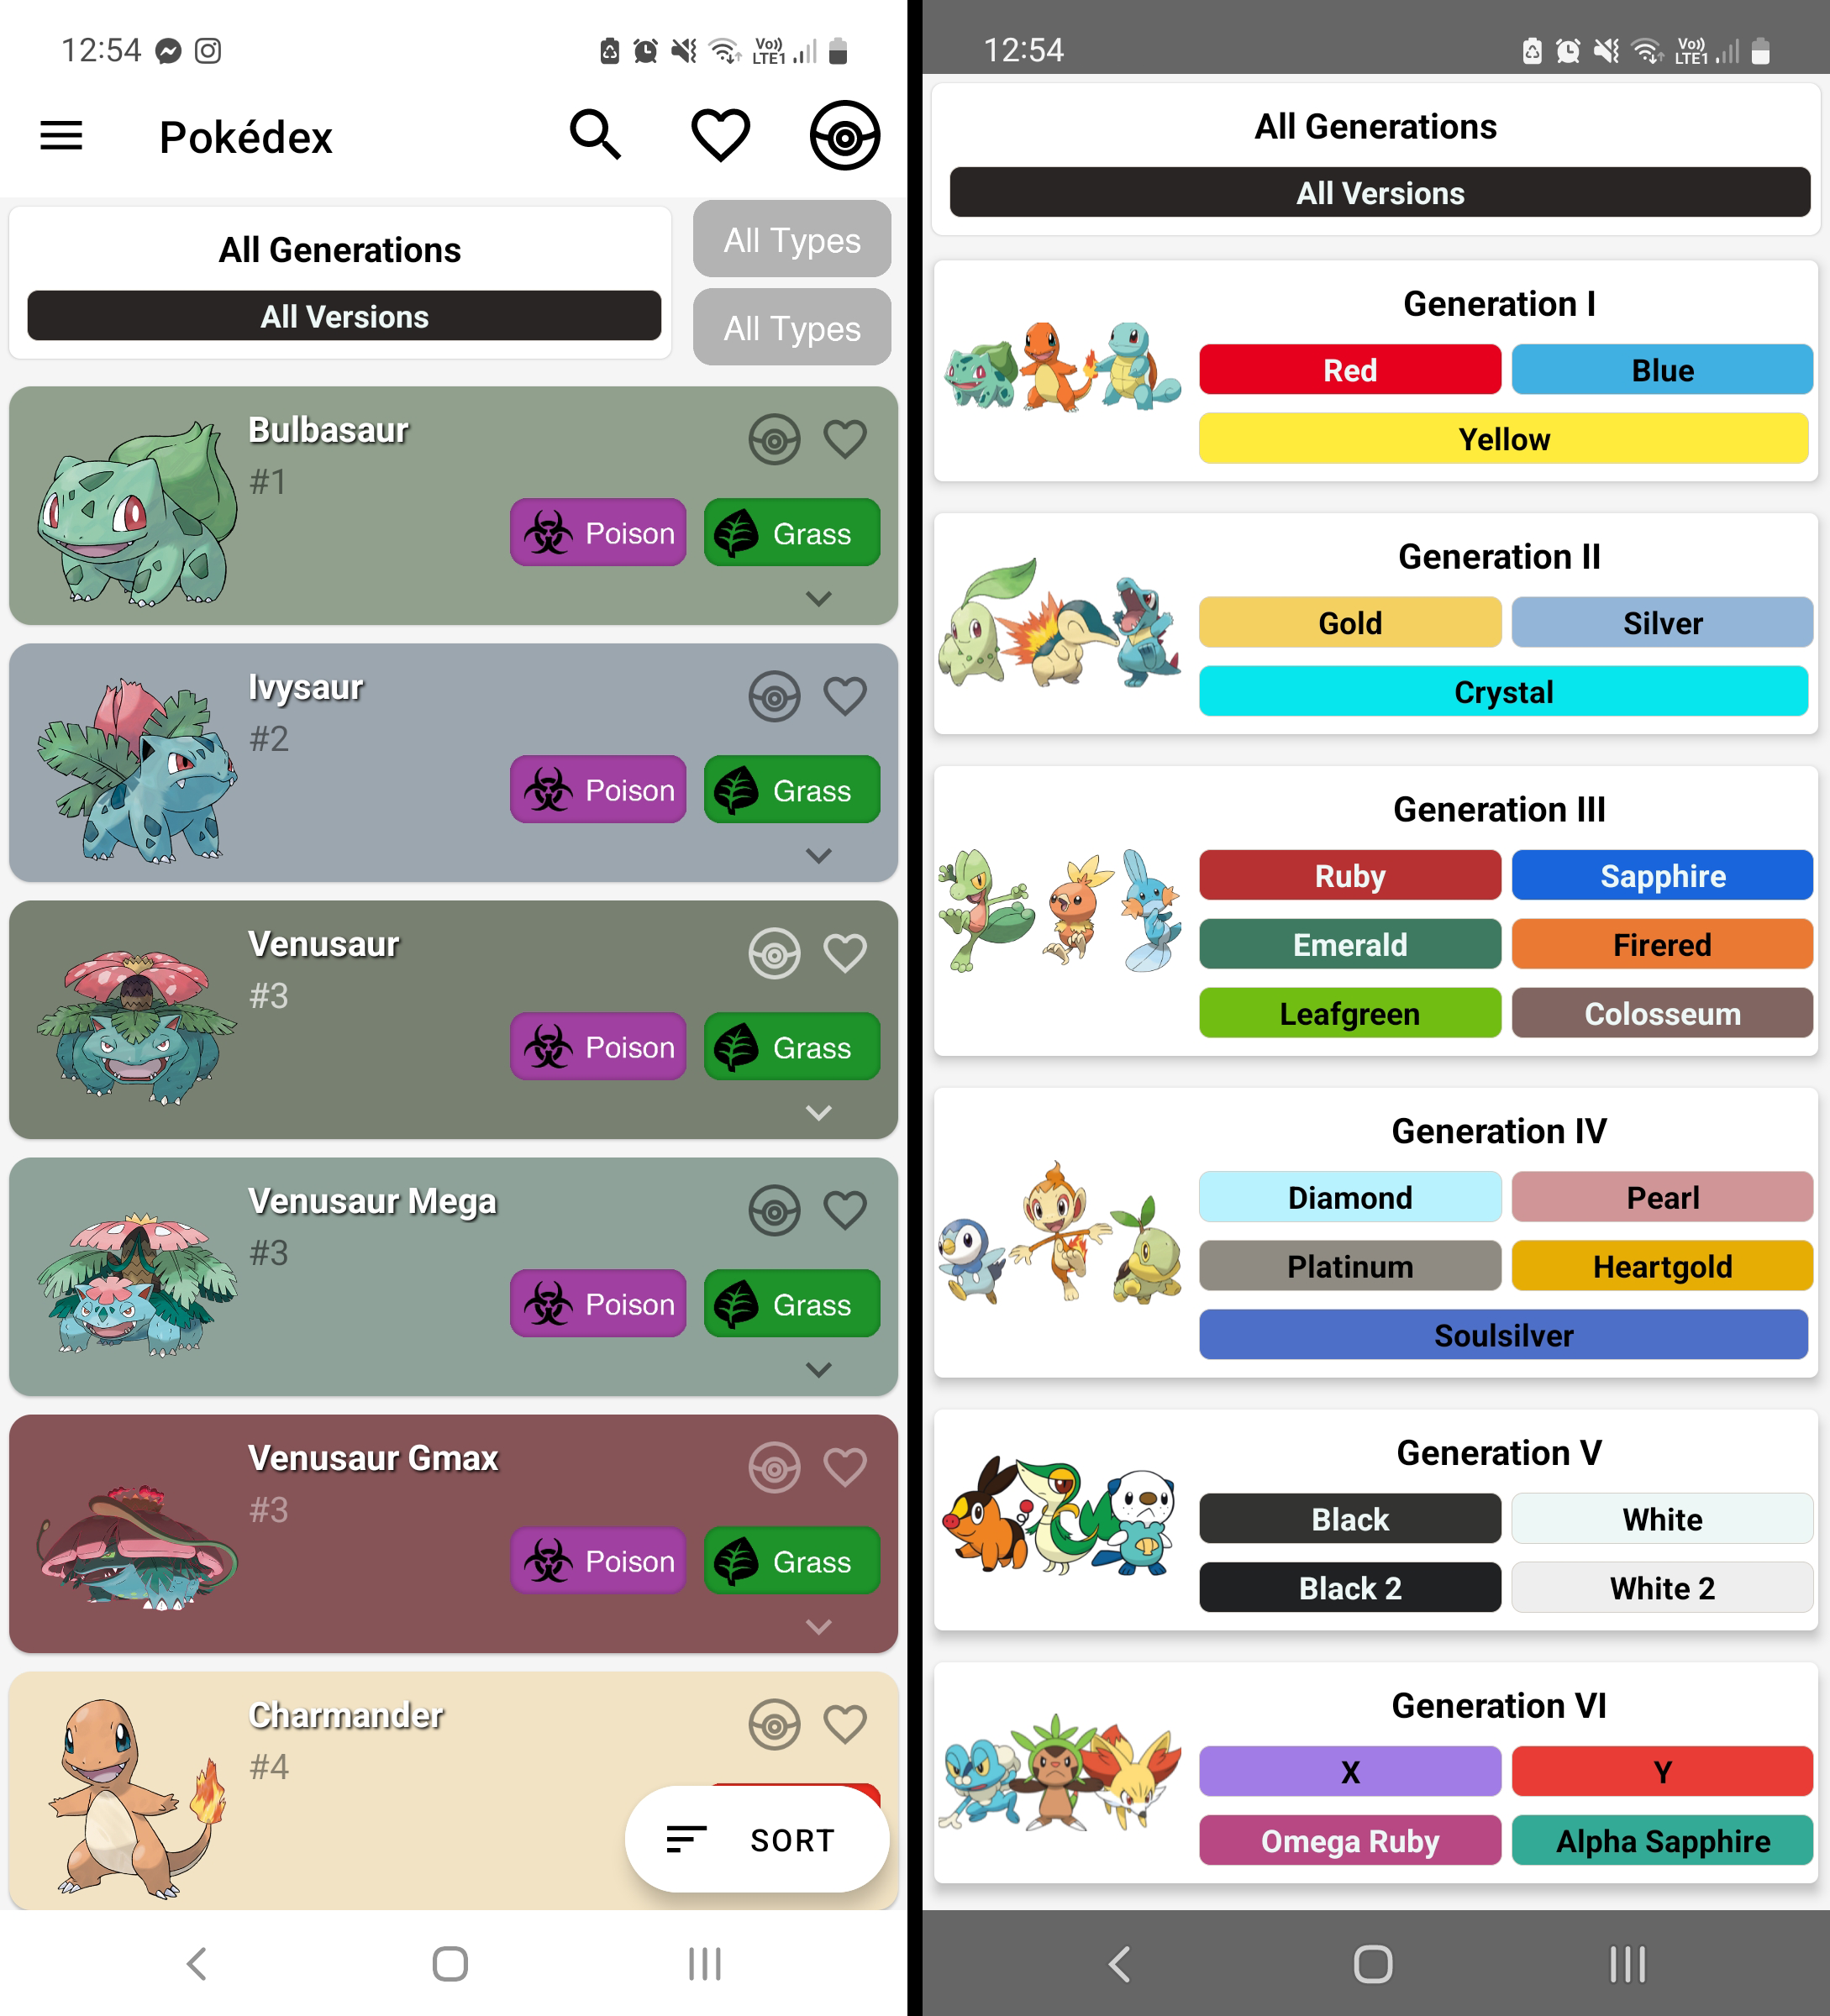 Official Pokemon Pokedex Launches For iOS In USA For Hands-On